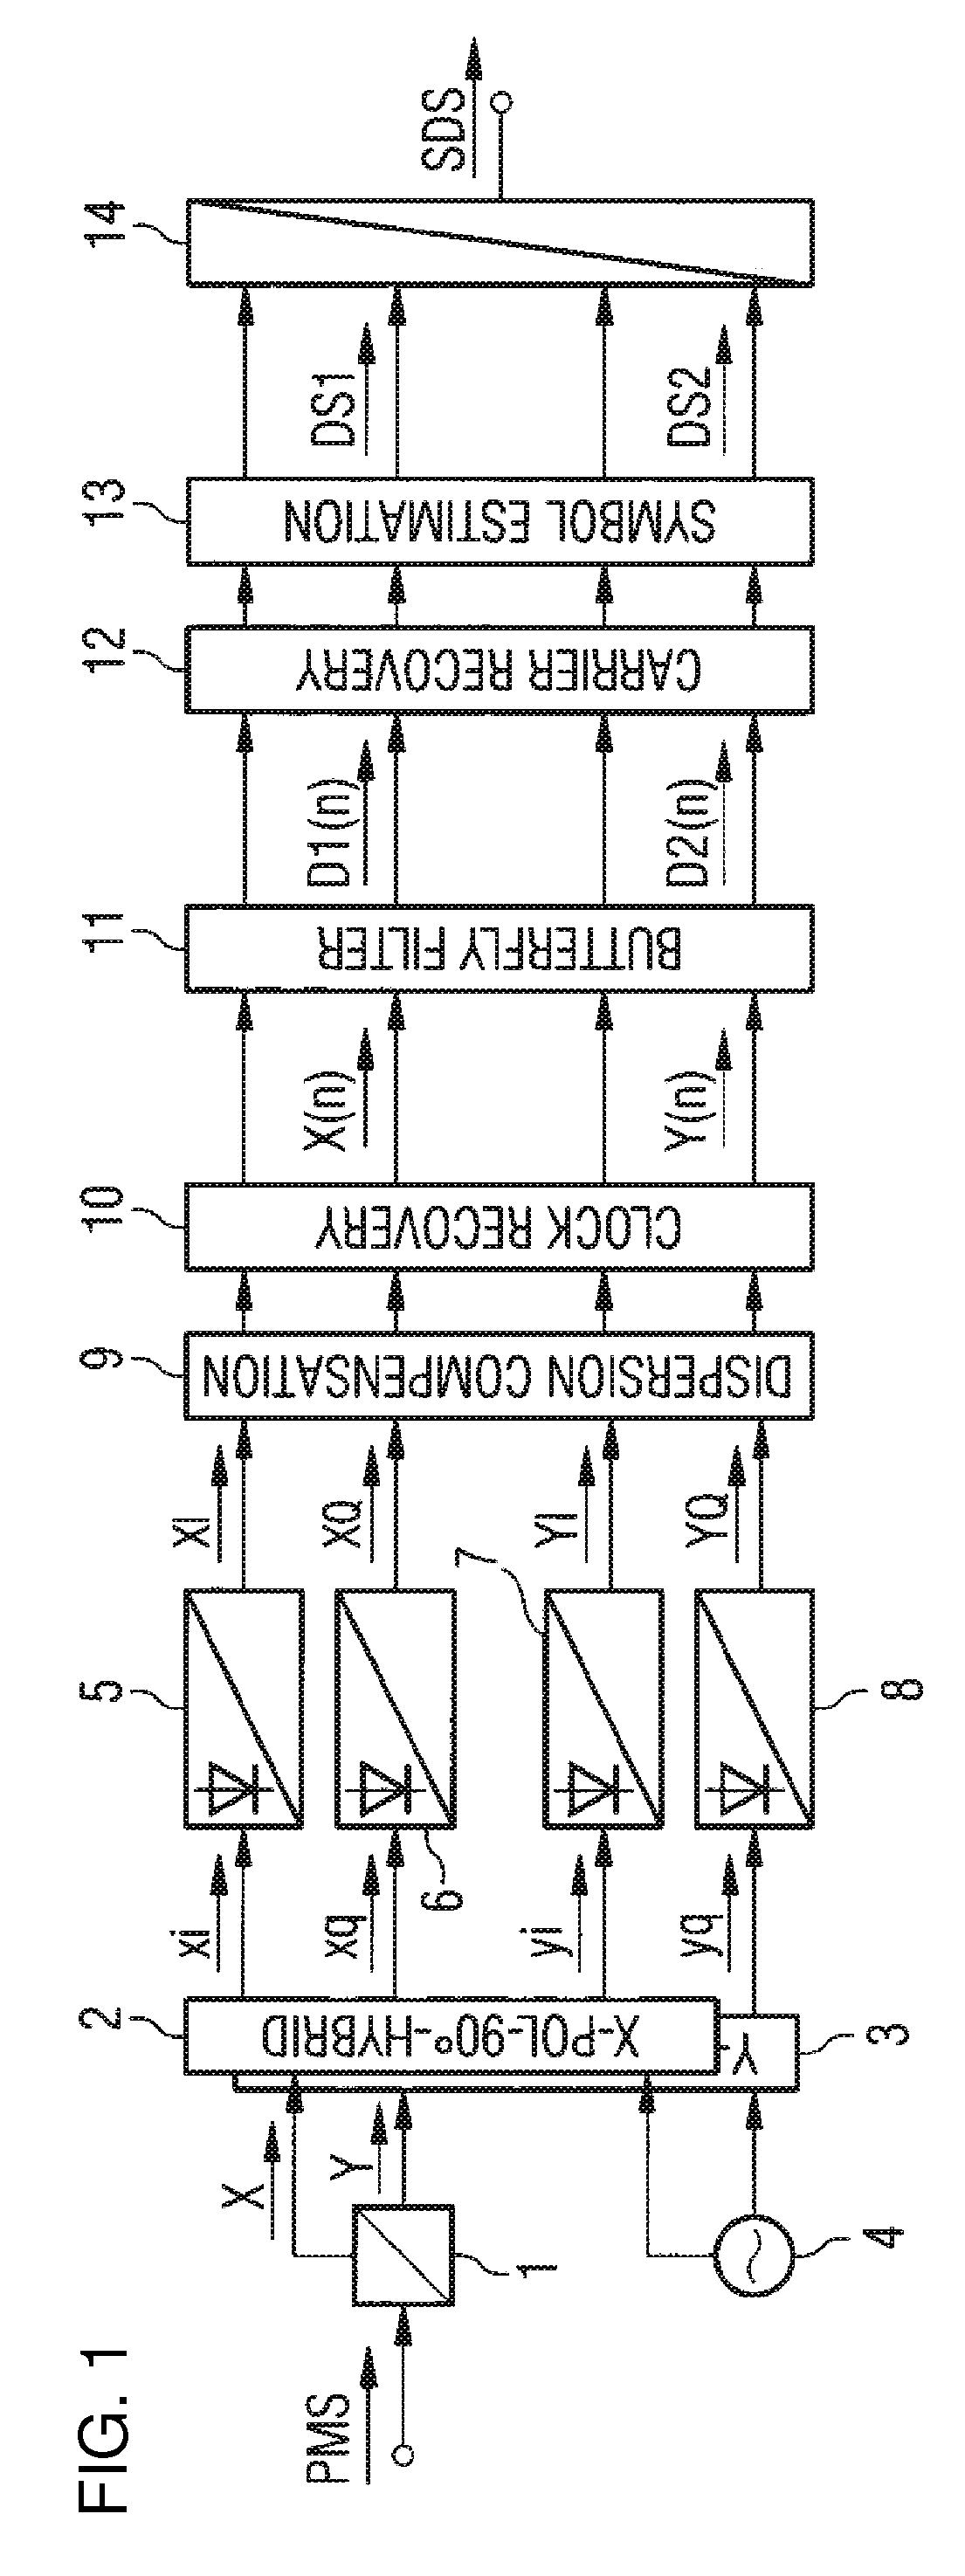 Clock recovery method and clock recovery arrangement for coherent polarization multiplex receivers